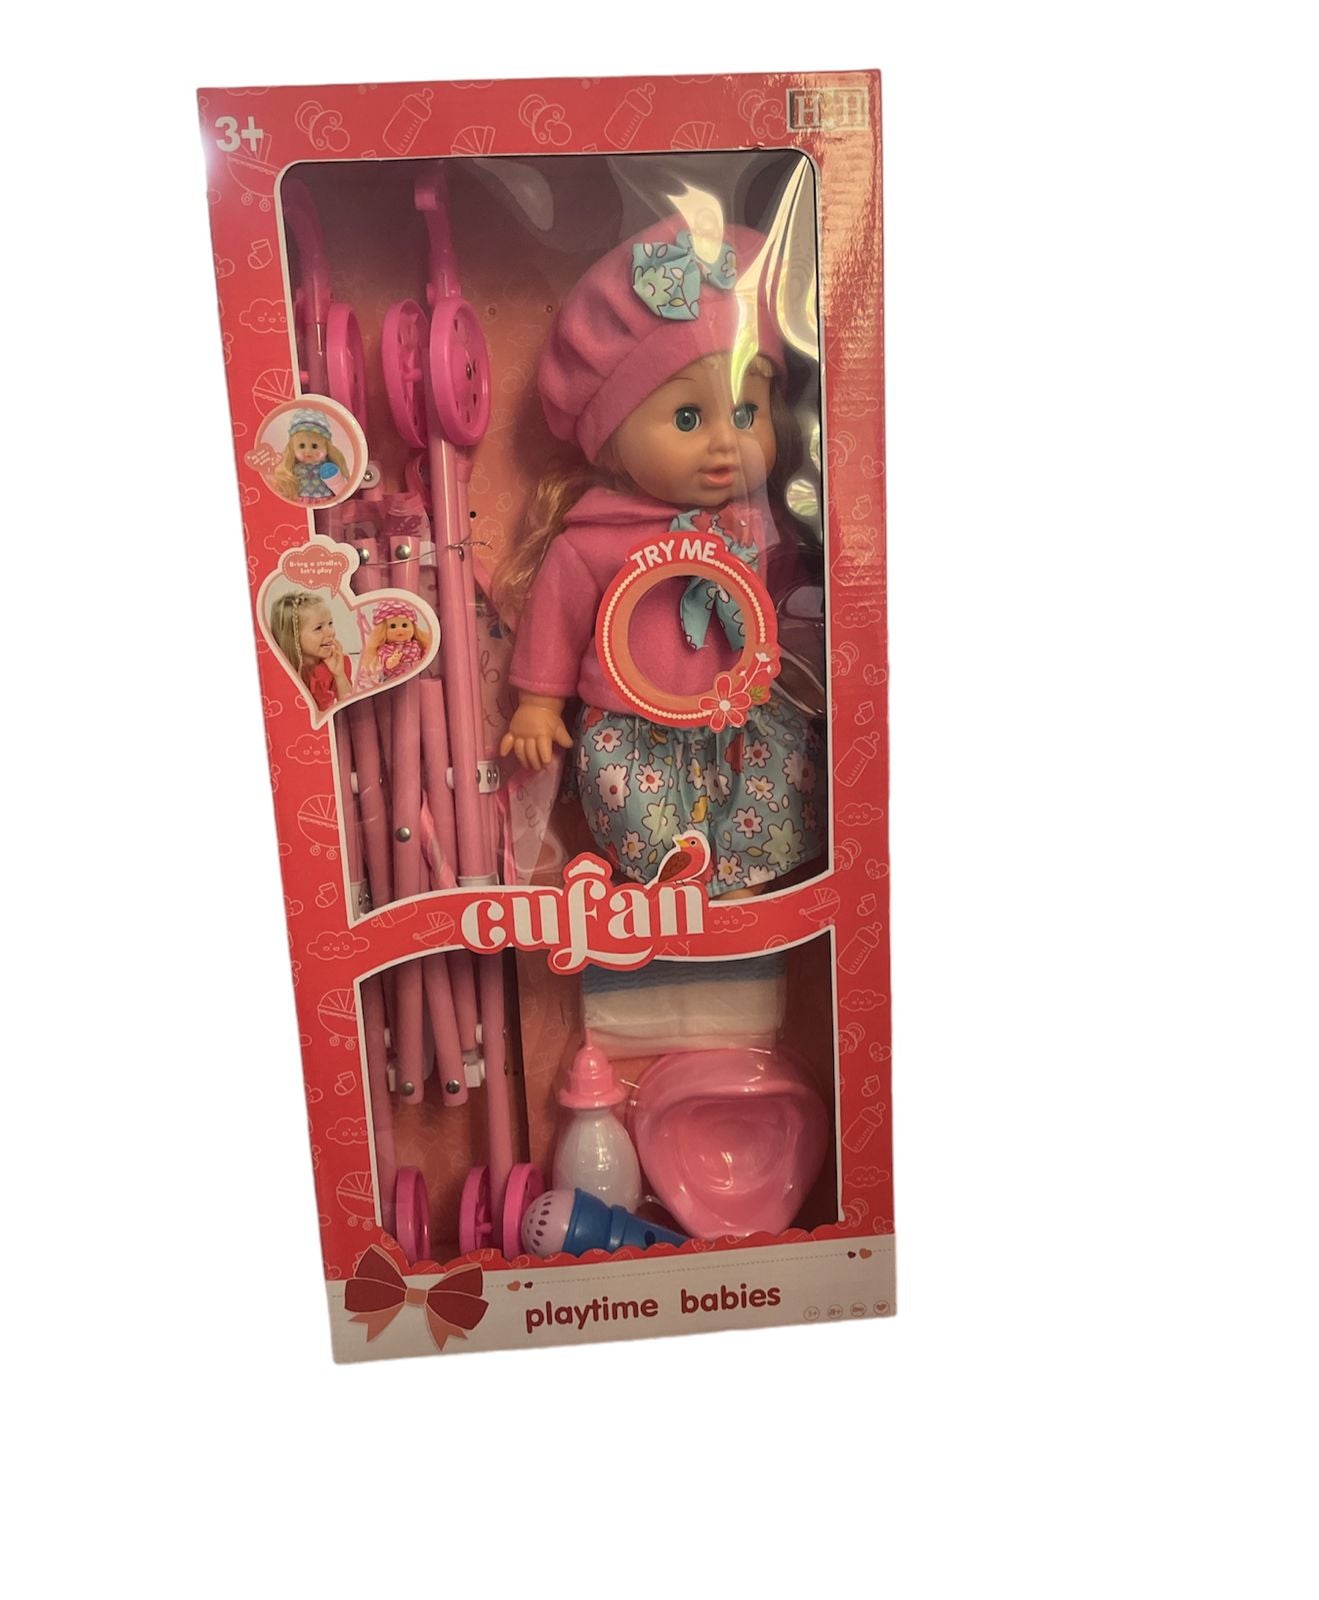 Cufan sweet baby doll with accessories Playtime Babies